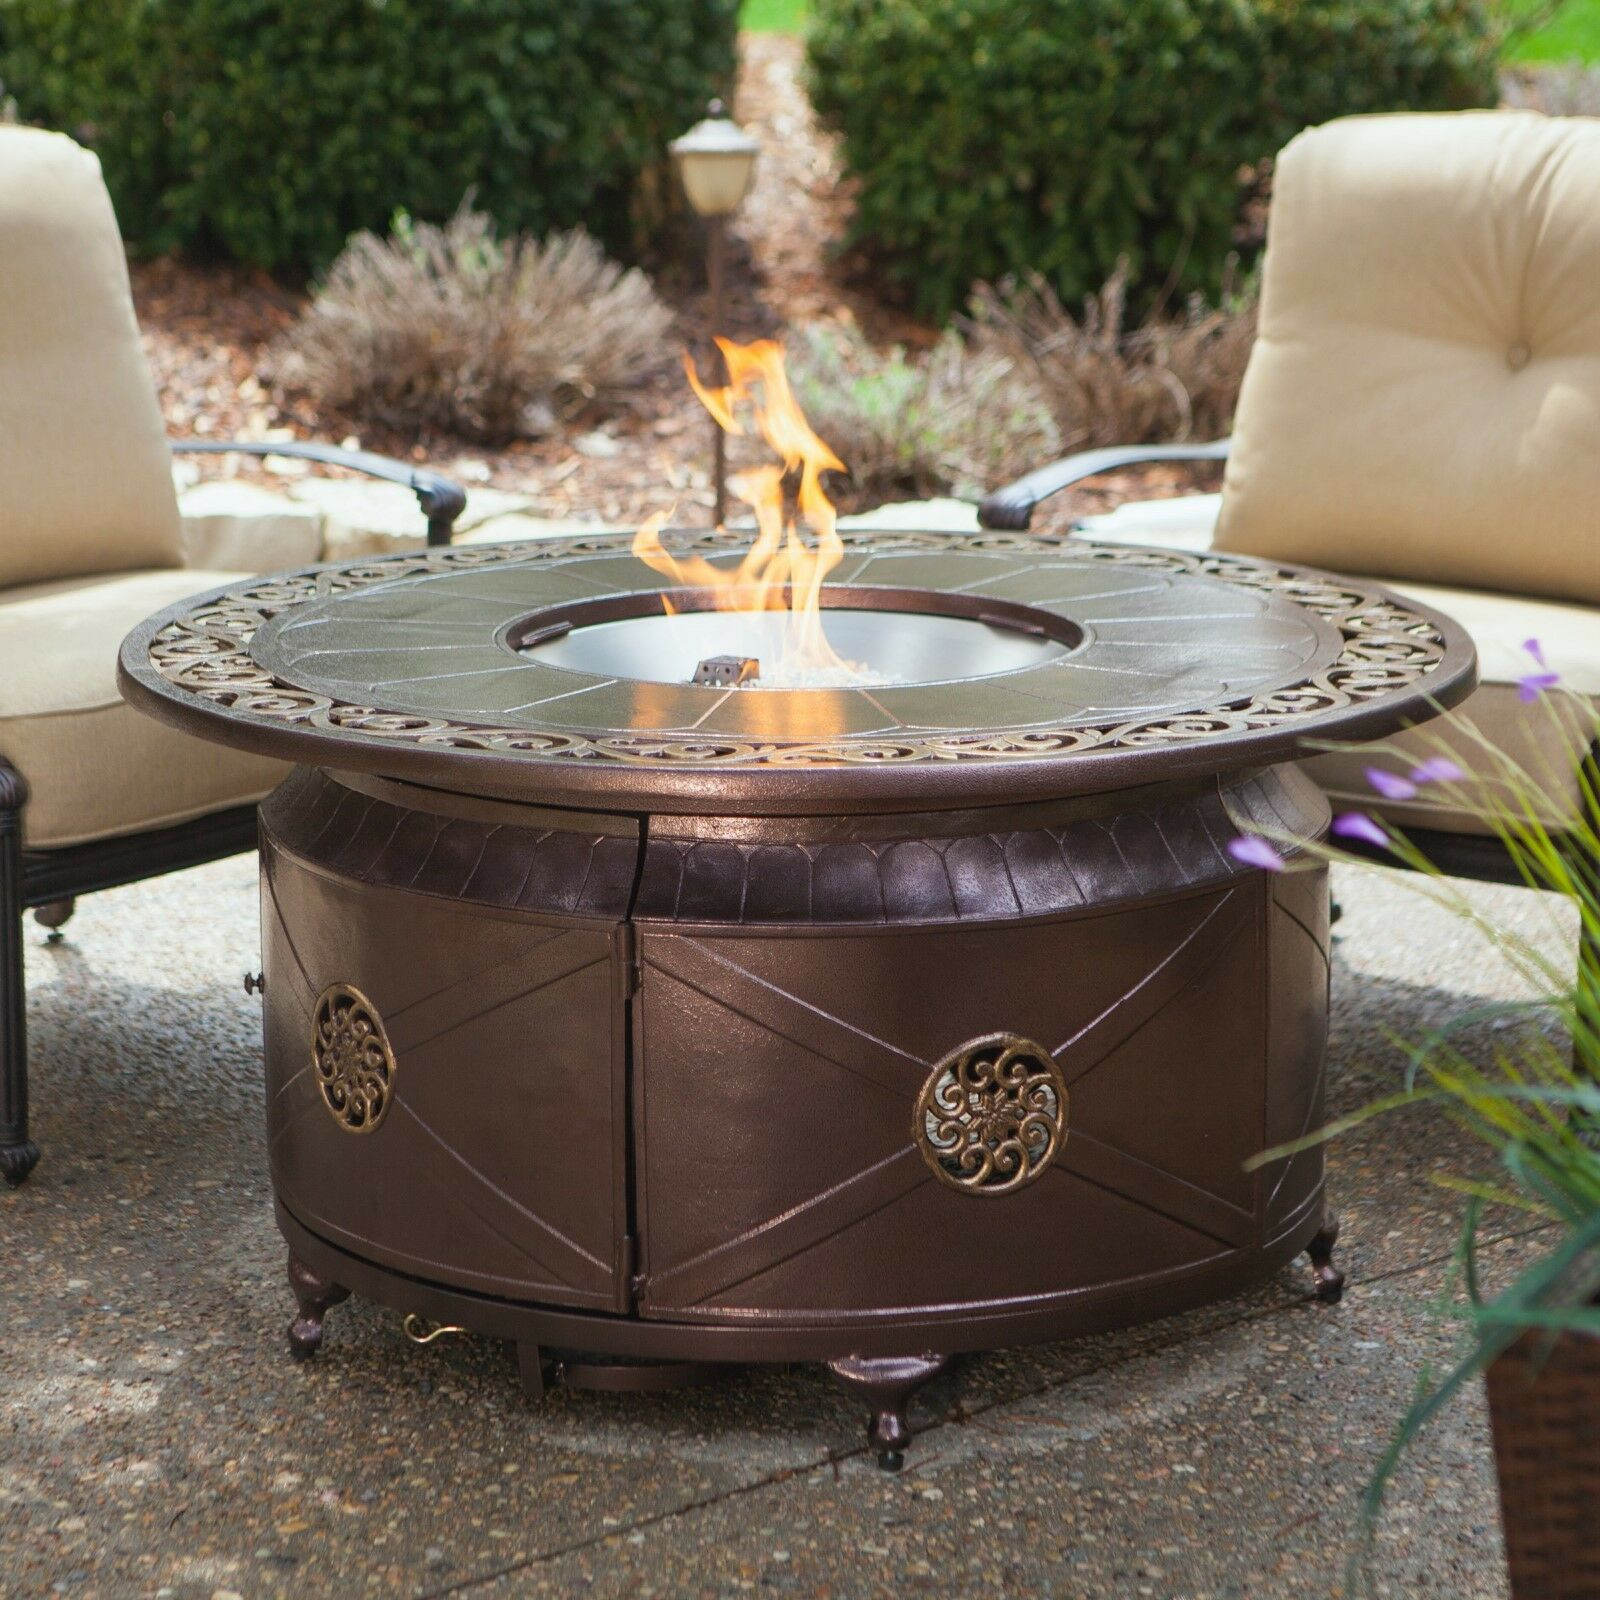 Patio Fire Pit Propane
 Fire Pit Table Burner Patio Deck Outdoor Fireplace Propane